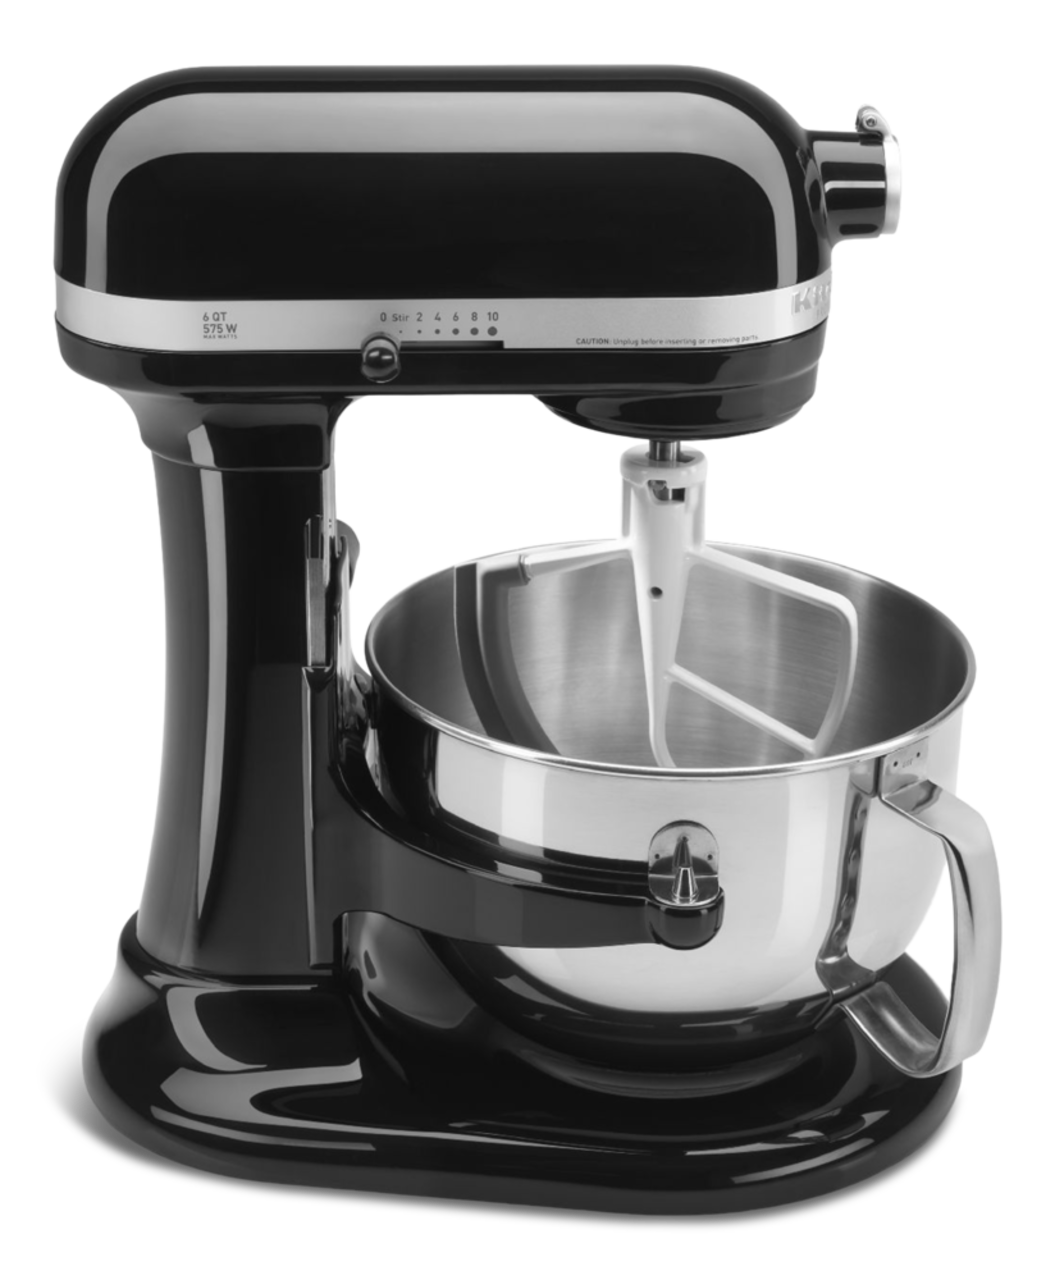 https://media-www.canadiantire.ca/product/living/kitchen/kitchen-appliances/0430676/kitchen-aid-flex-edge-beater-5-5-qrt-6-qrt-bowl-lift-fb9a9088-99c8-409c-be3f-7cf5d2ead530.png?imdensity=1&imwidth=1244&impolicy=mZoom